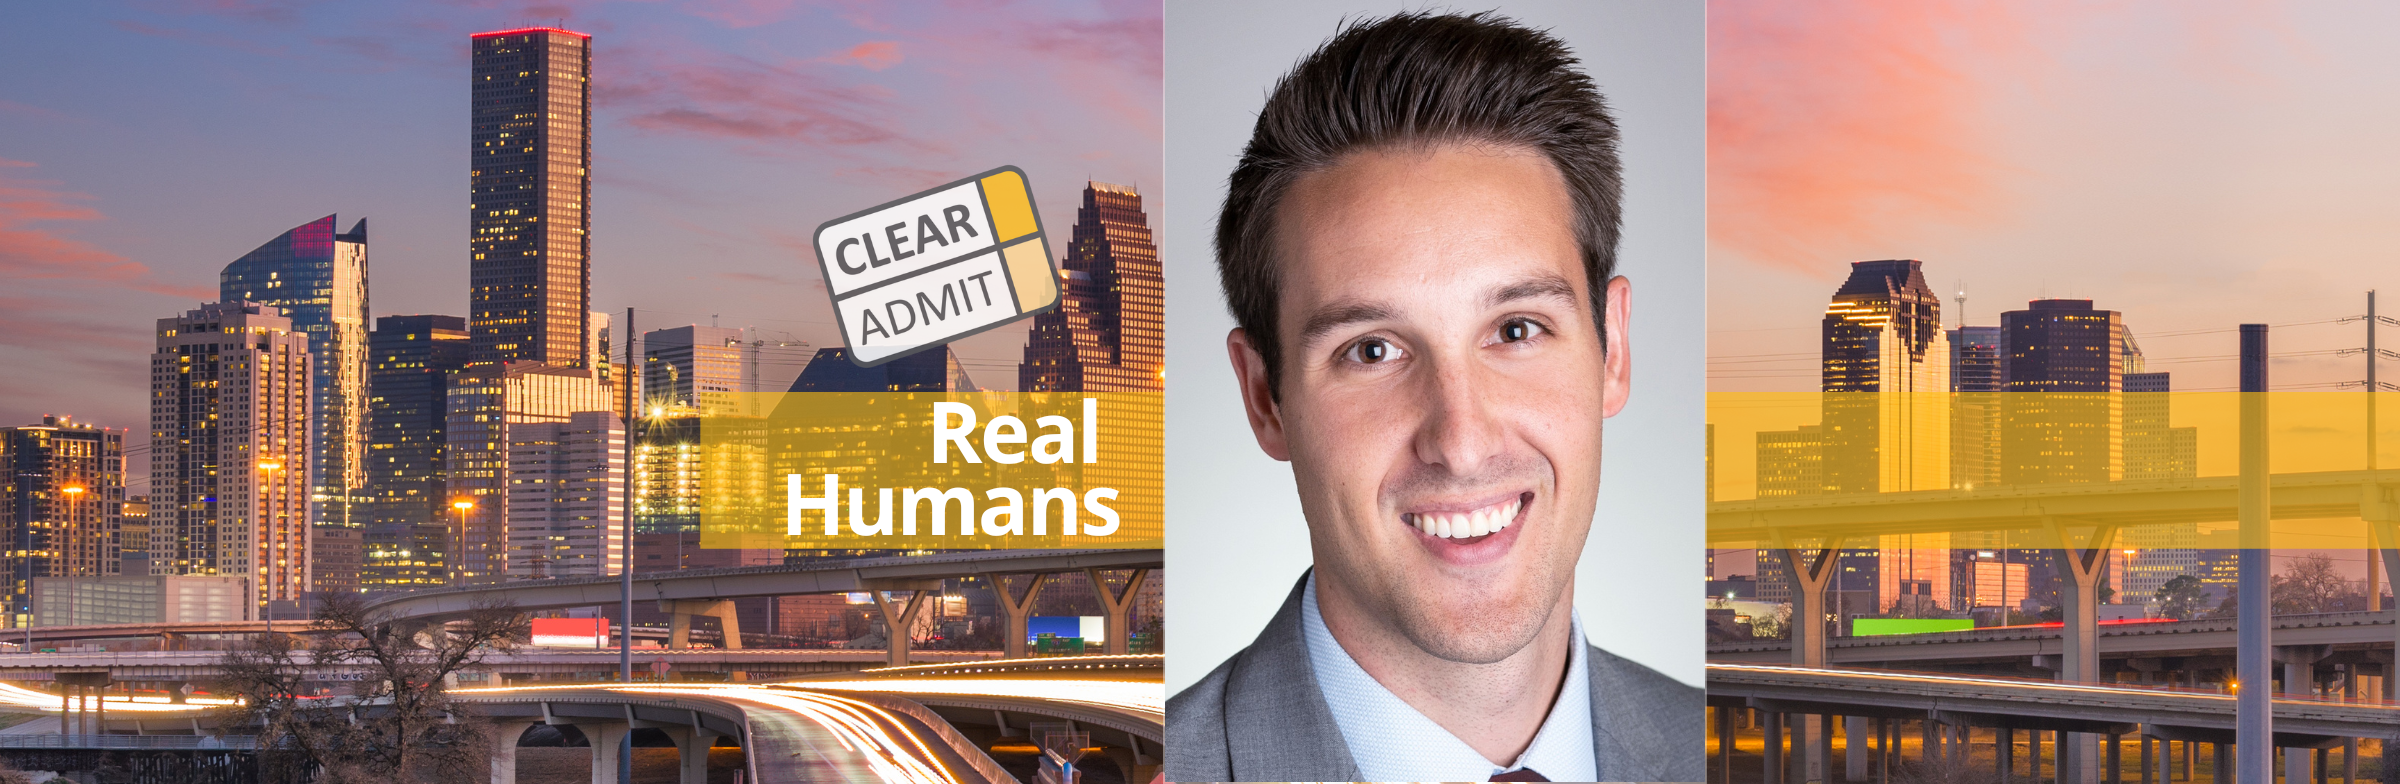 Image for Real Humans of Accenture: James Morris, Indiana Kelley ’20, Strategy & Consulting Manager